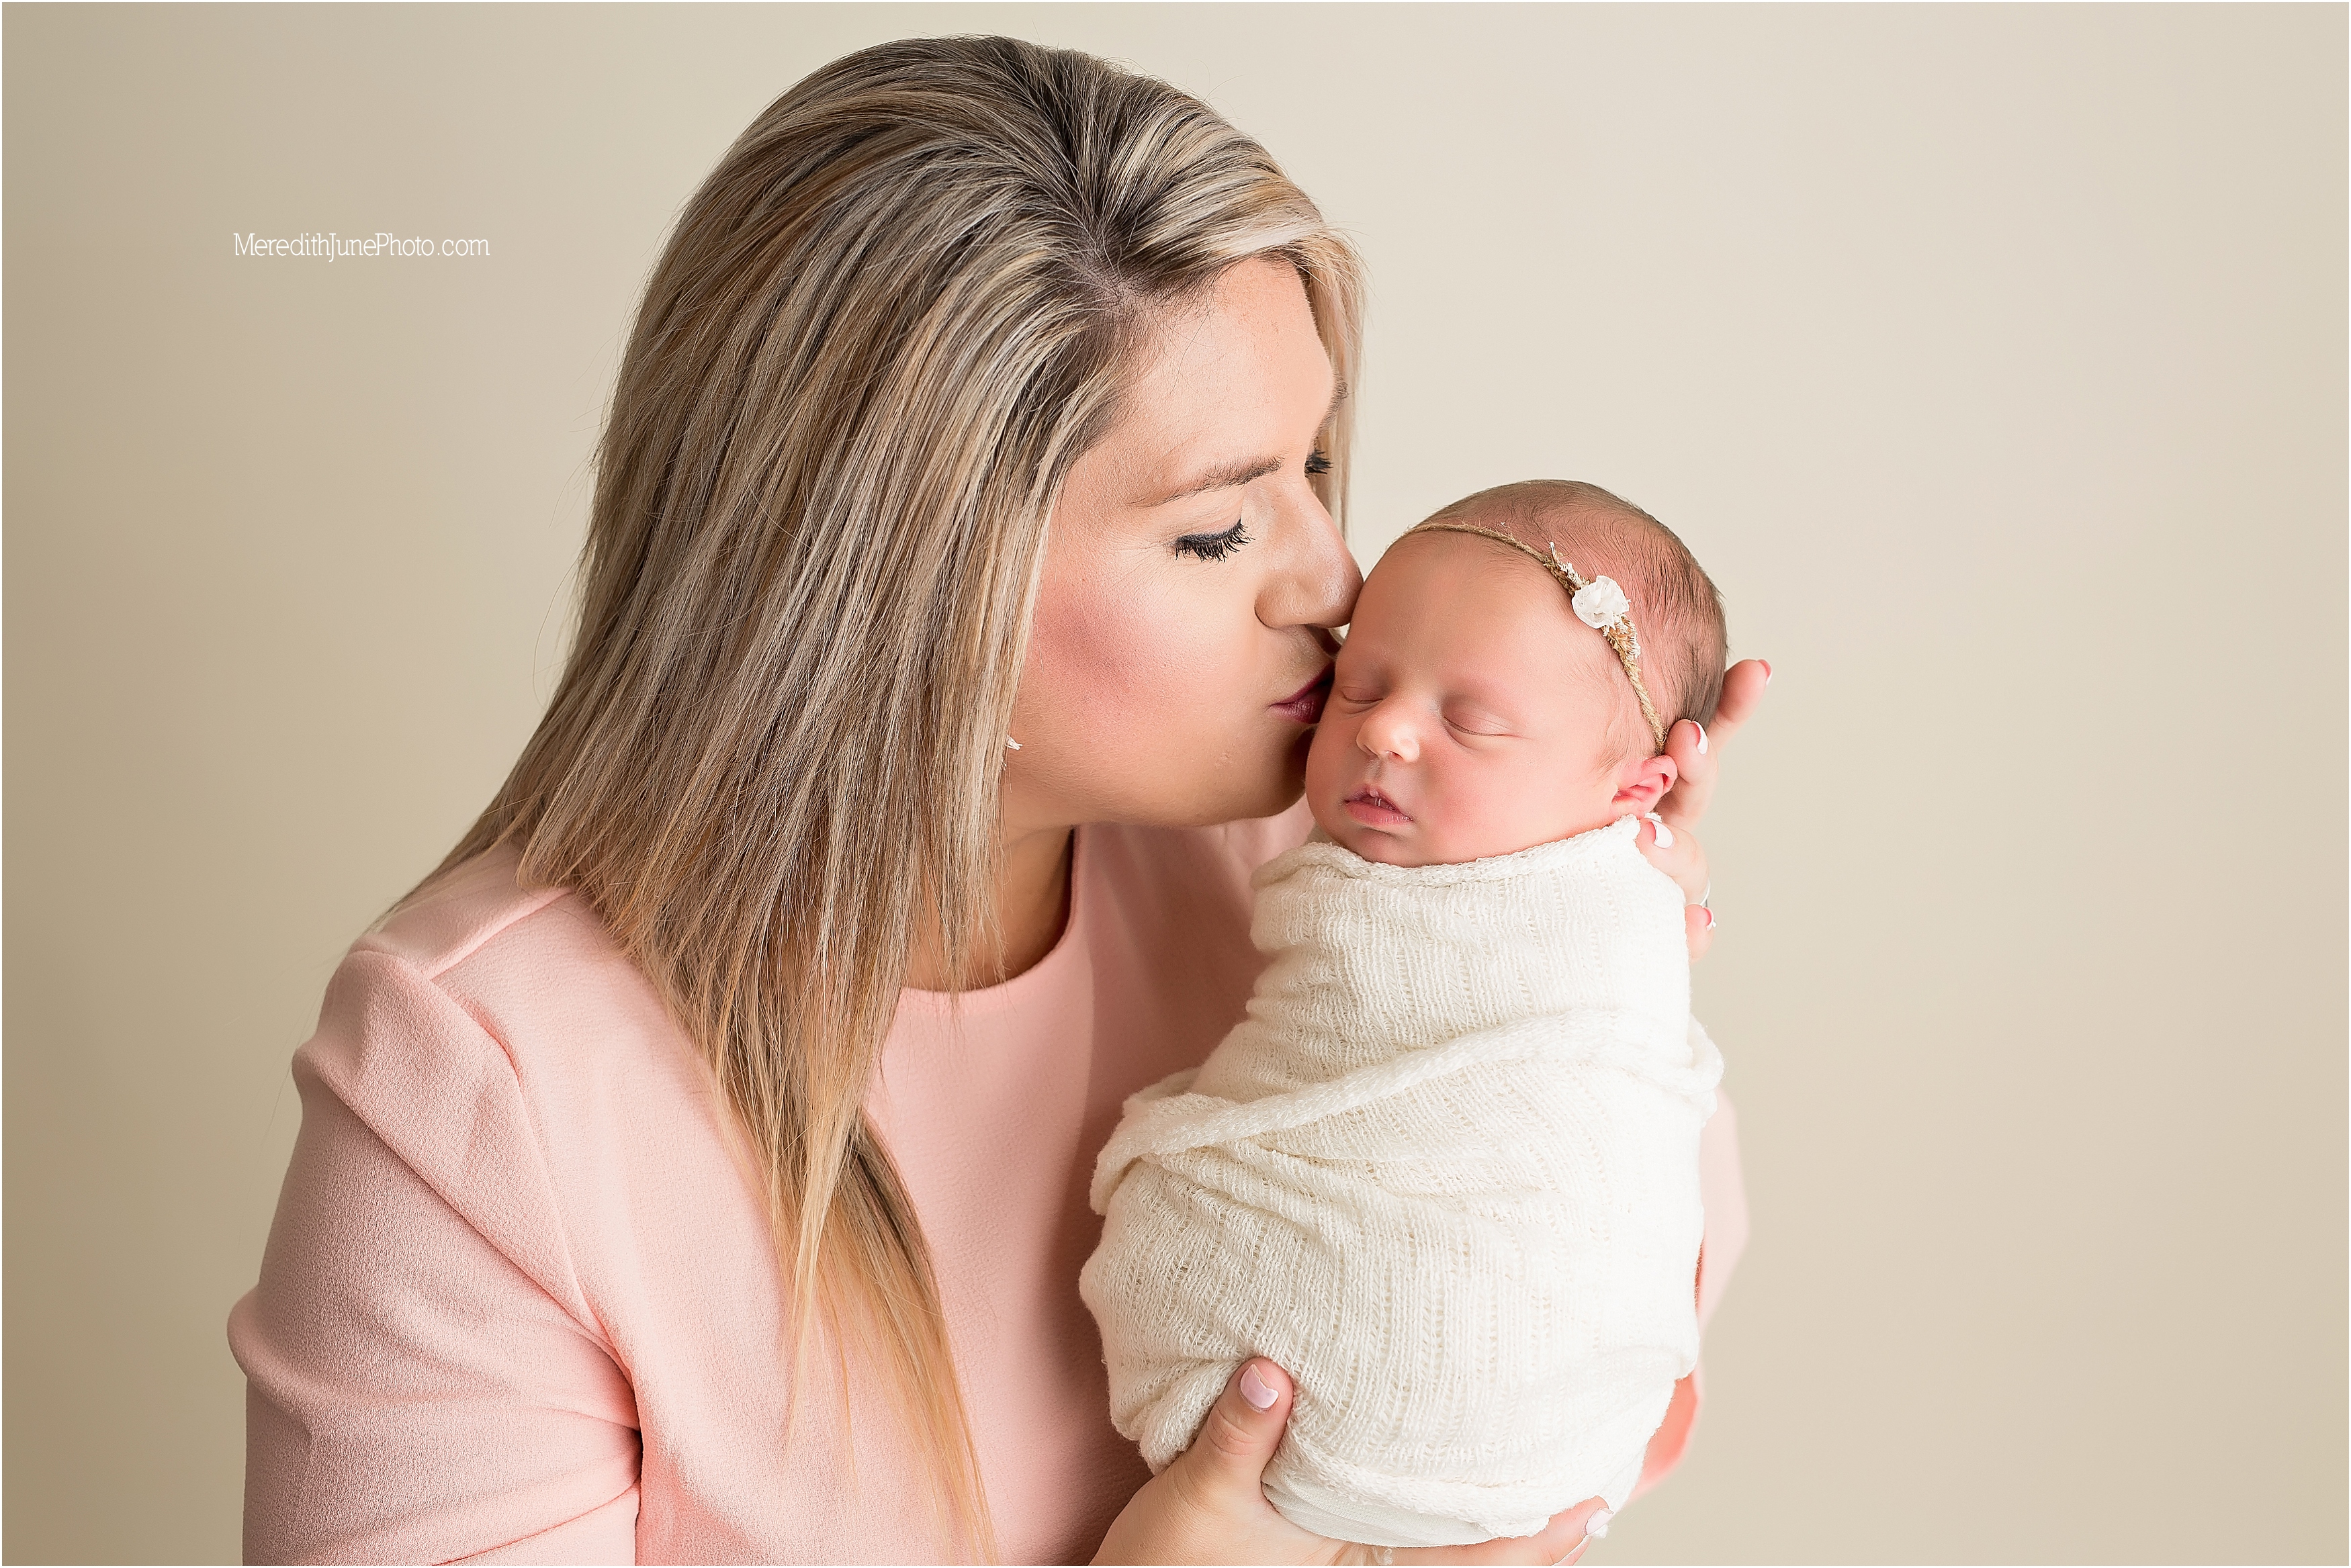 Mom with baby girl Adayln during newborn photo session